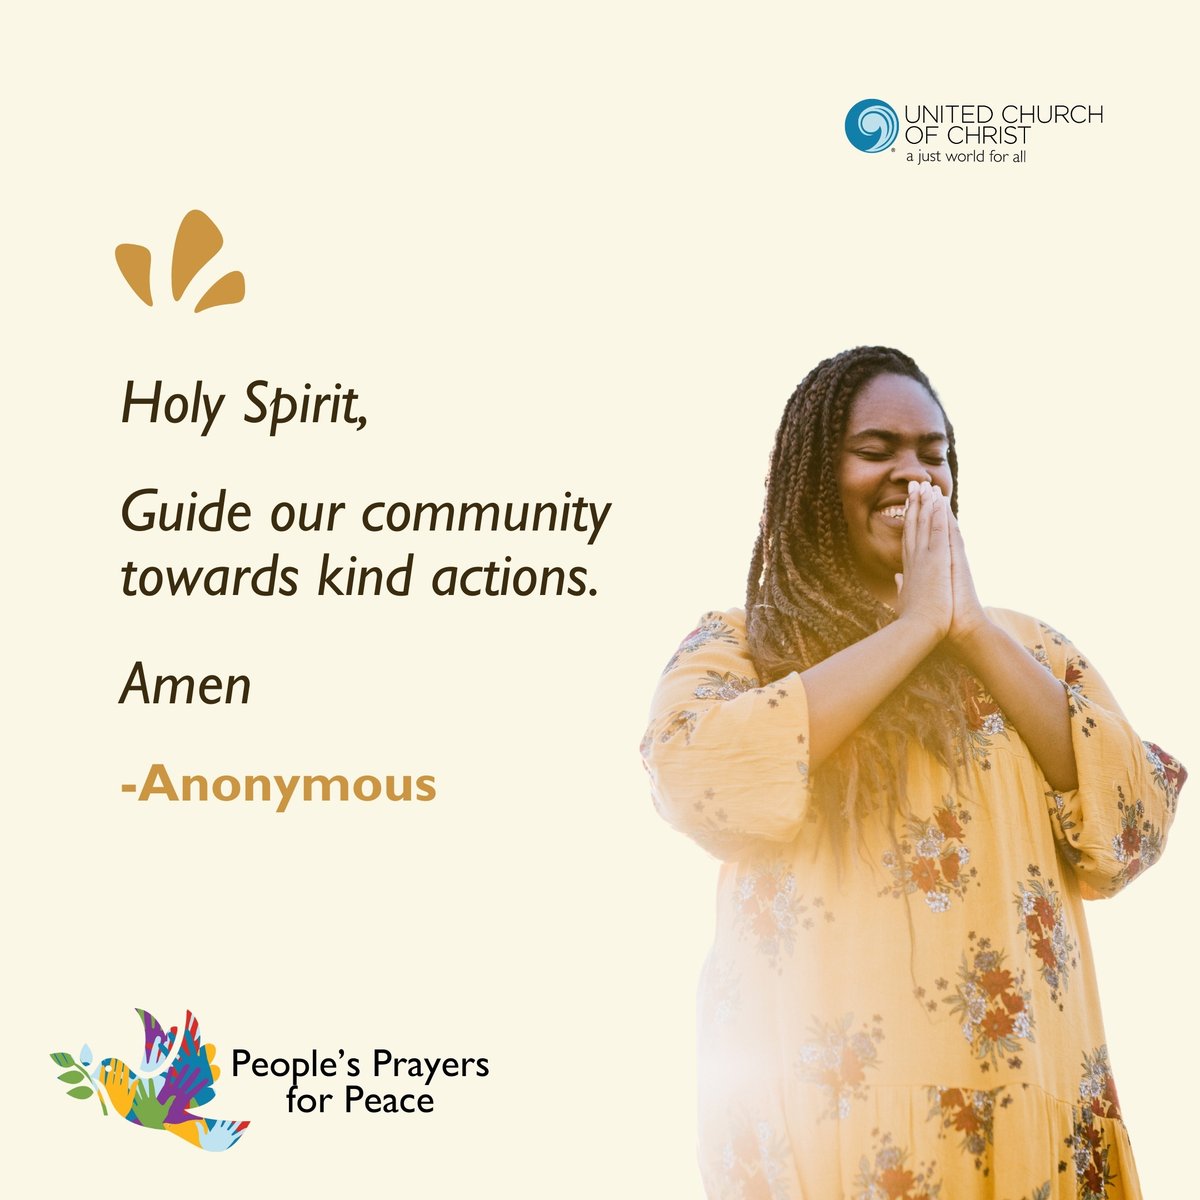 🙏🏾 Holy Spirit,

Guide our community towards kind actions. Amen

-Anonymous

👉🏾 Join the People's Prayers for Peace initiative and share your own prayer here: ow.ly/Mx5F50RnShC

#PrayersForPeace #JustPeace #Prayers #Peace